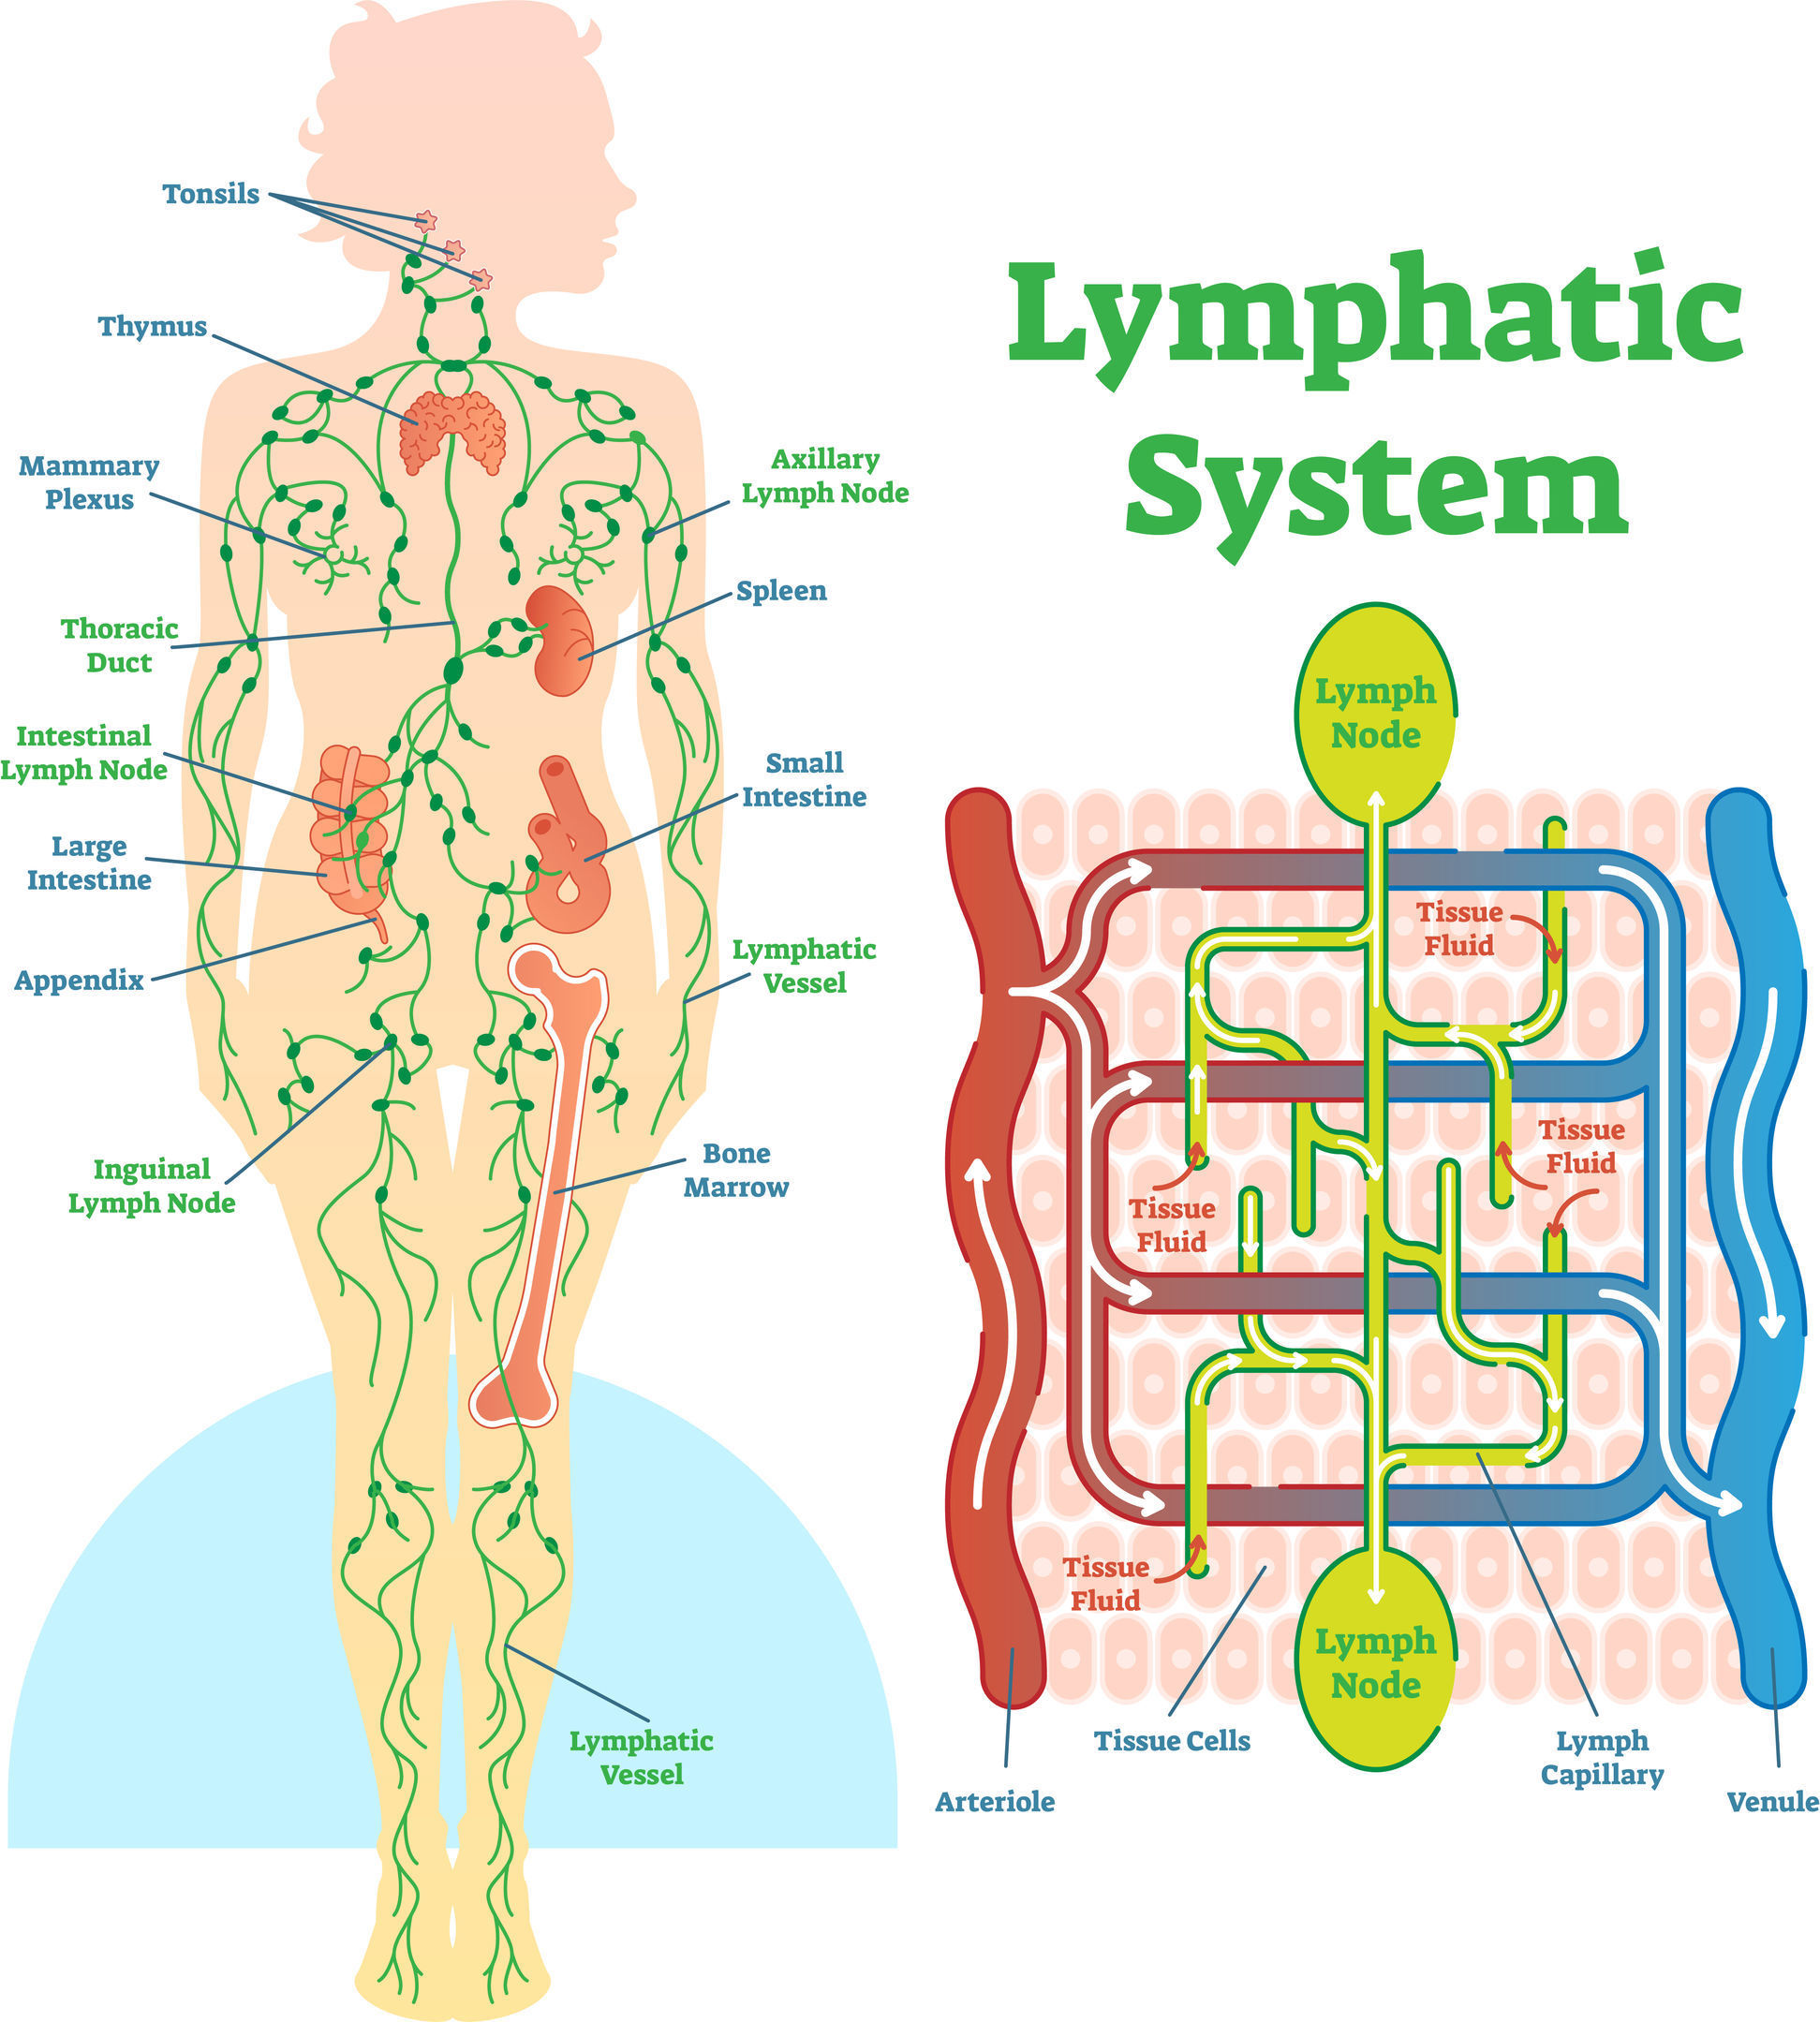 what is manual lymphatic drainage